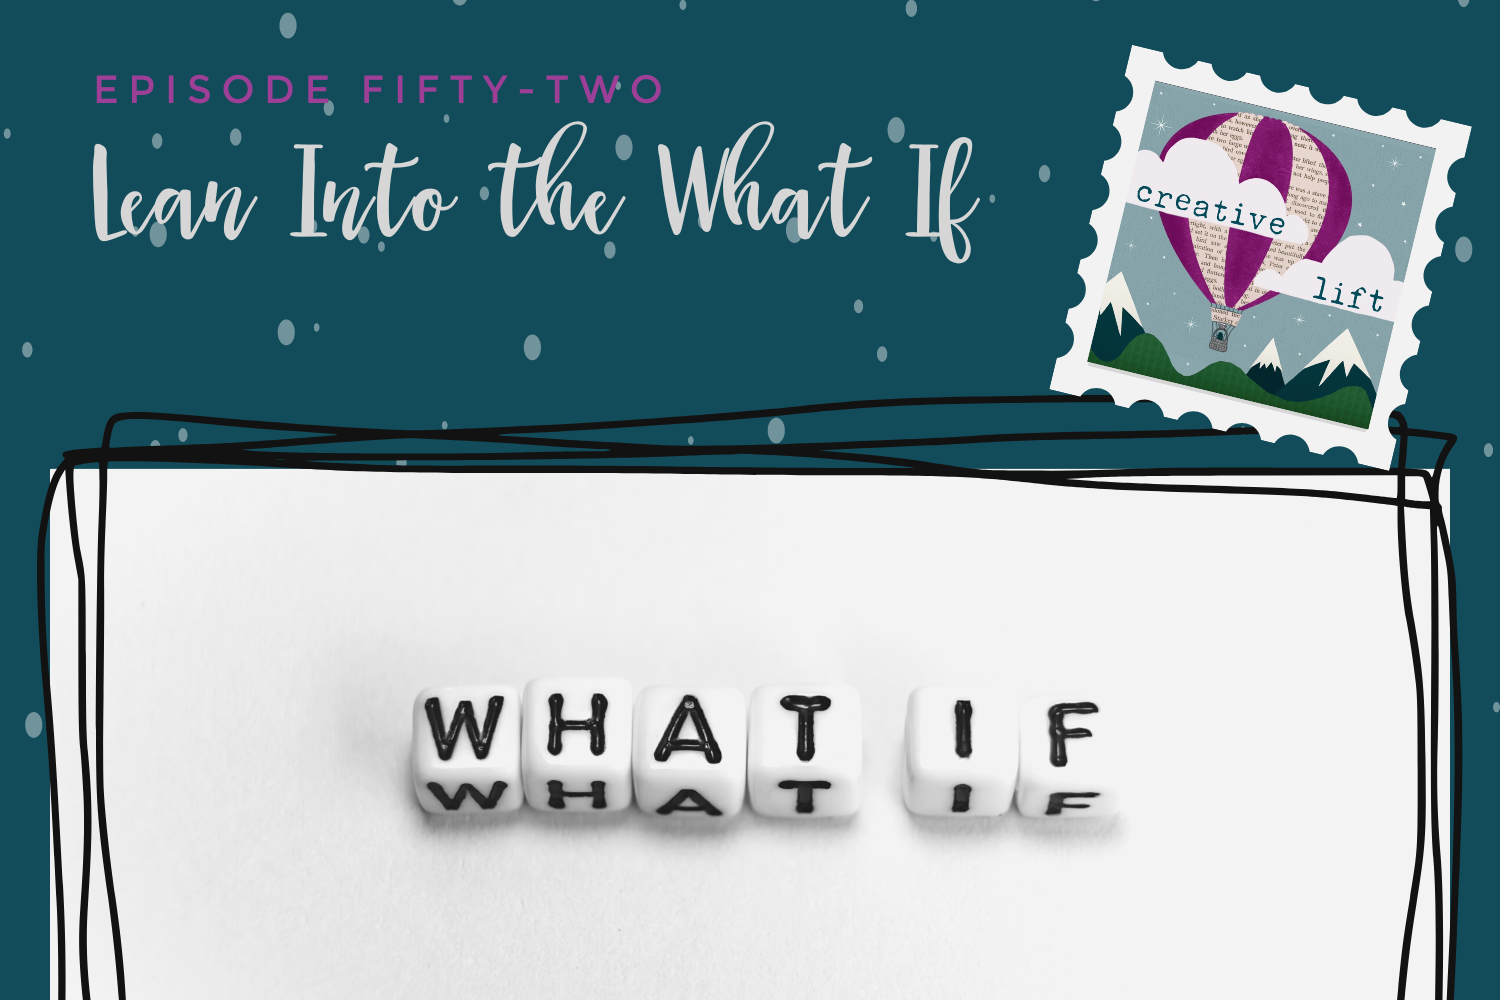 Creative Lift Episode 52: Lean Into the What If